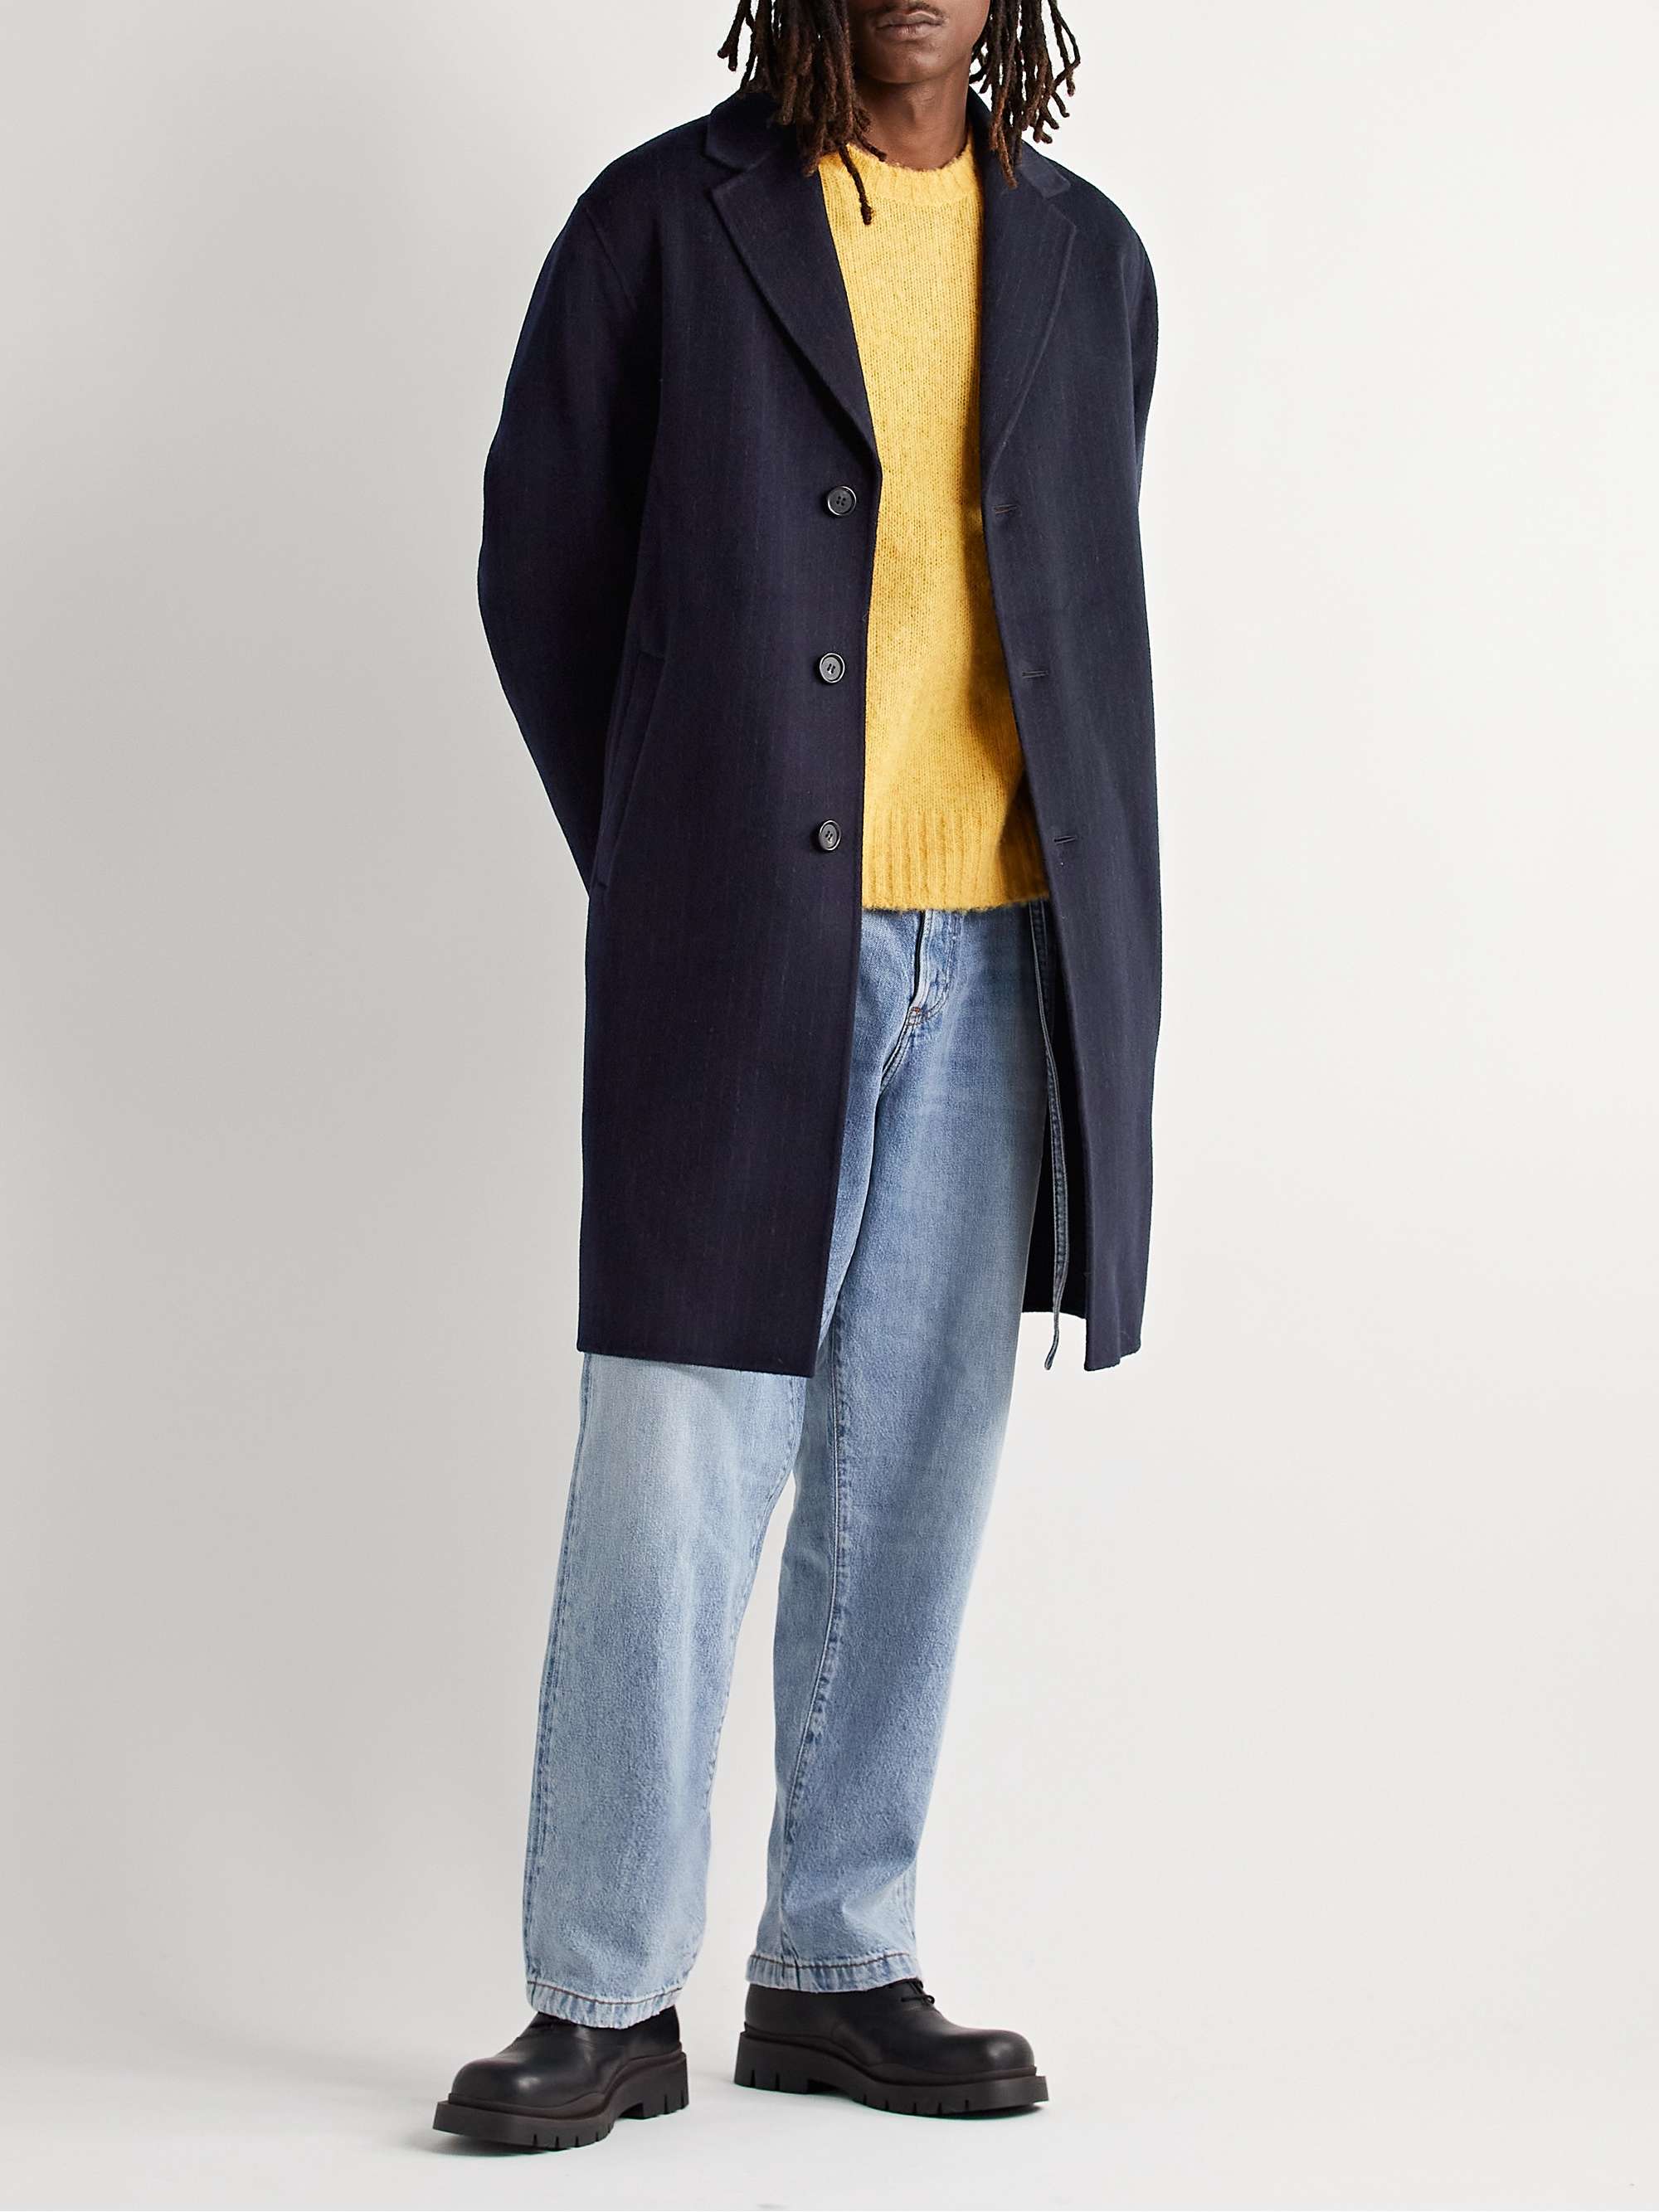 ACNE STUDIOS Pinstriped Double-Faced Wool Coat